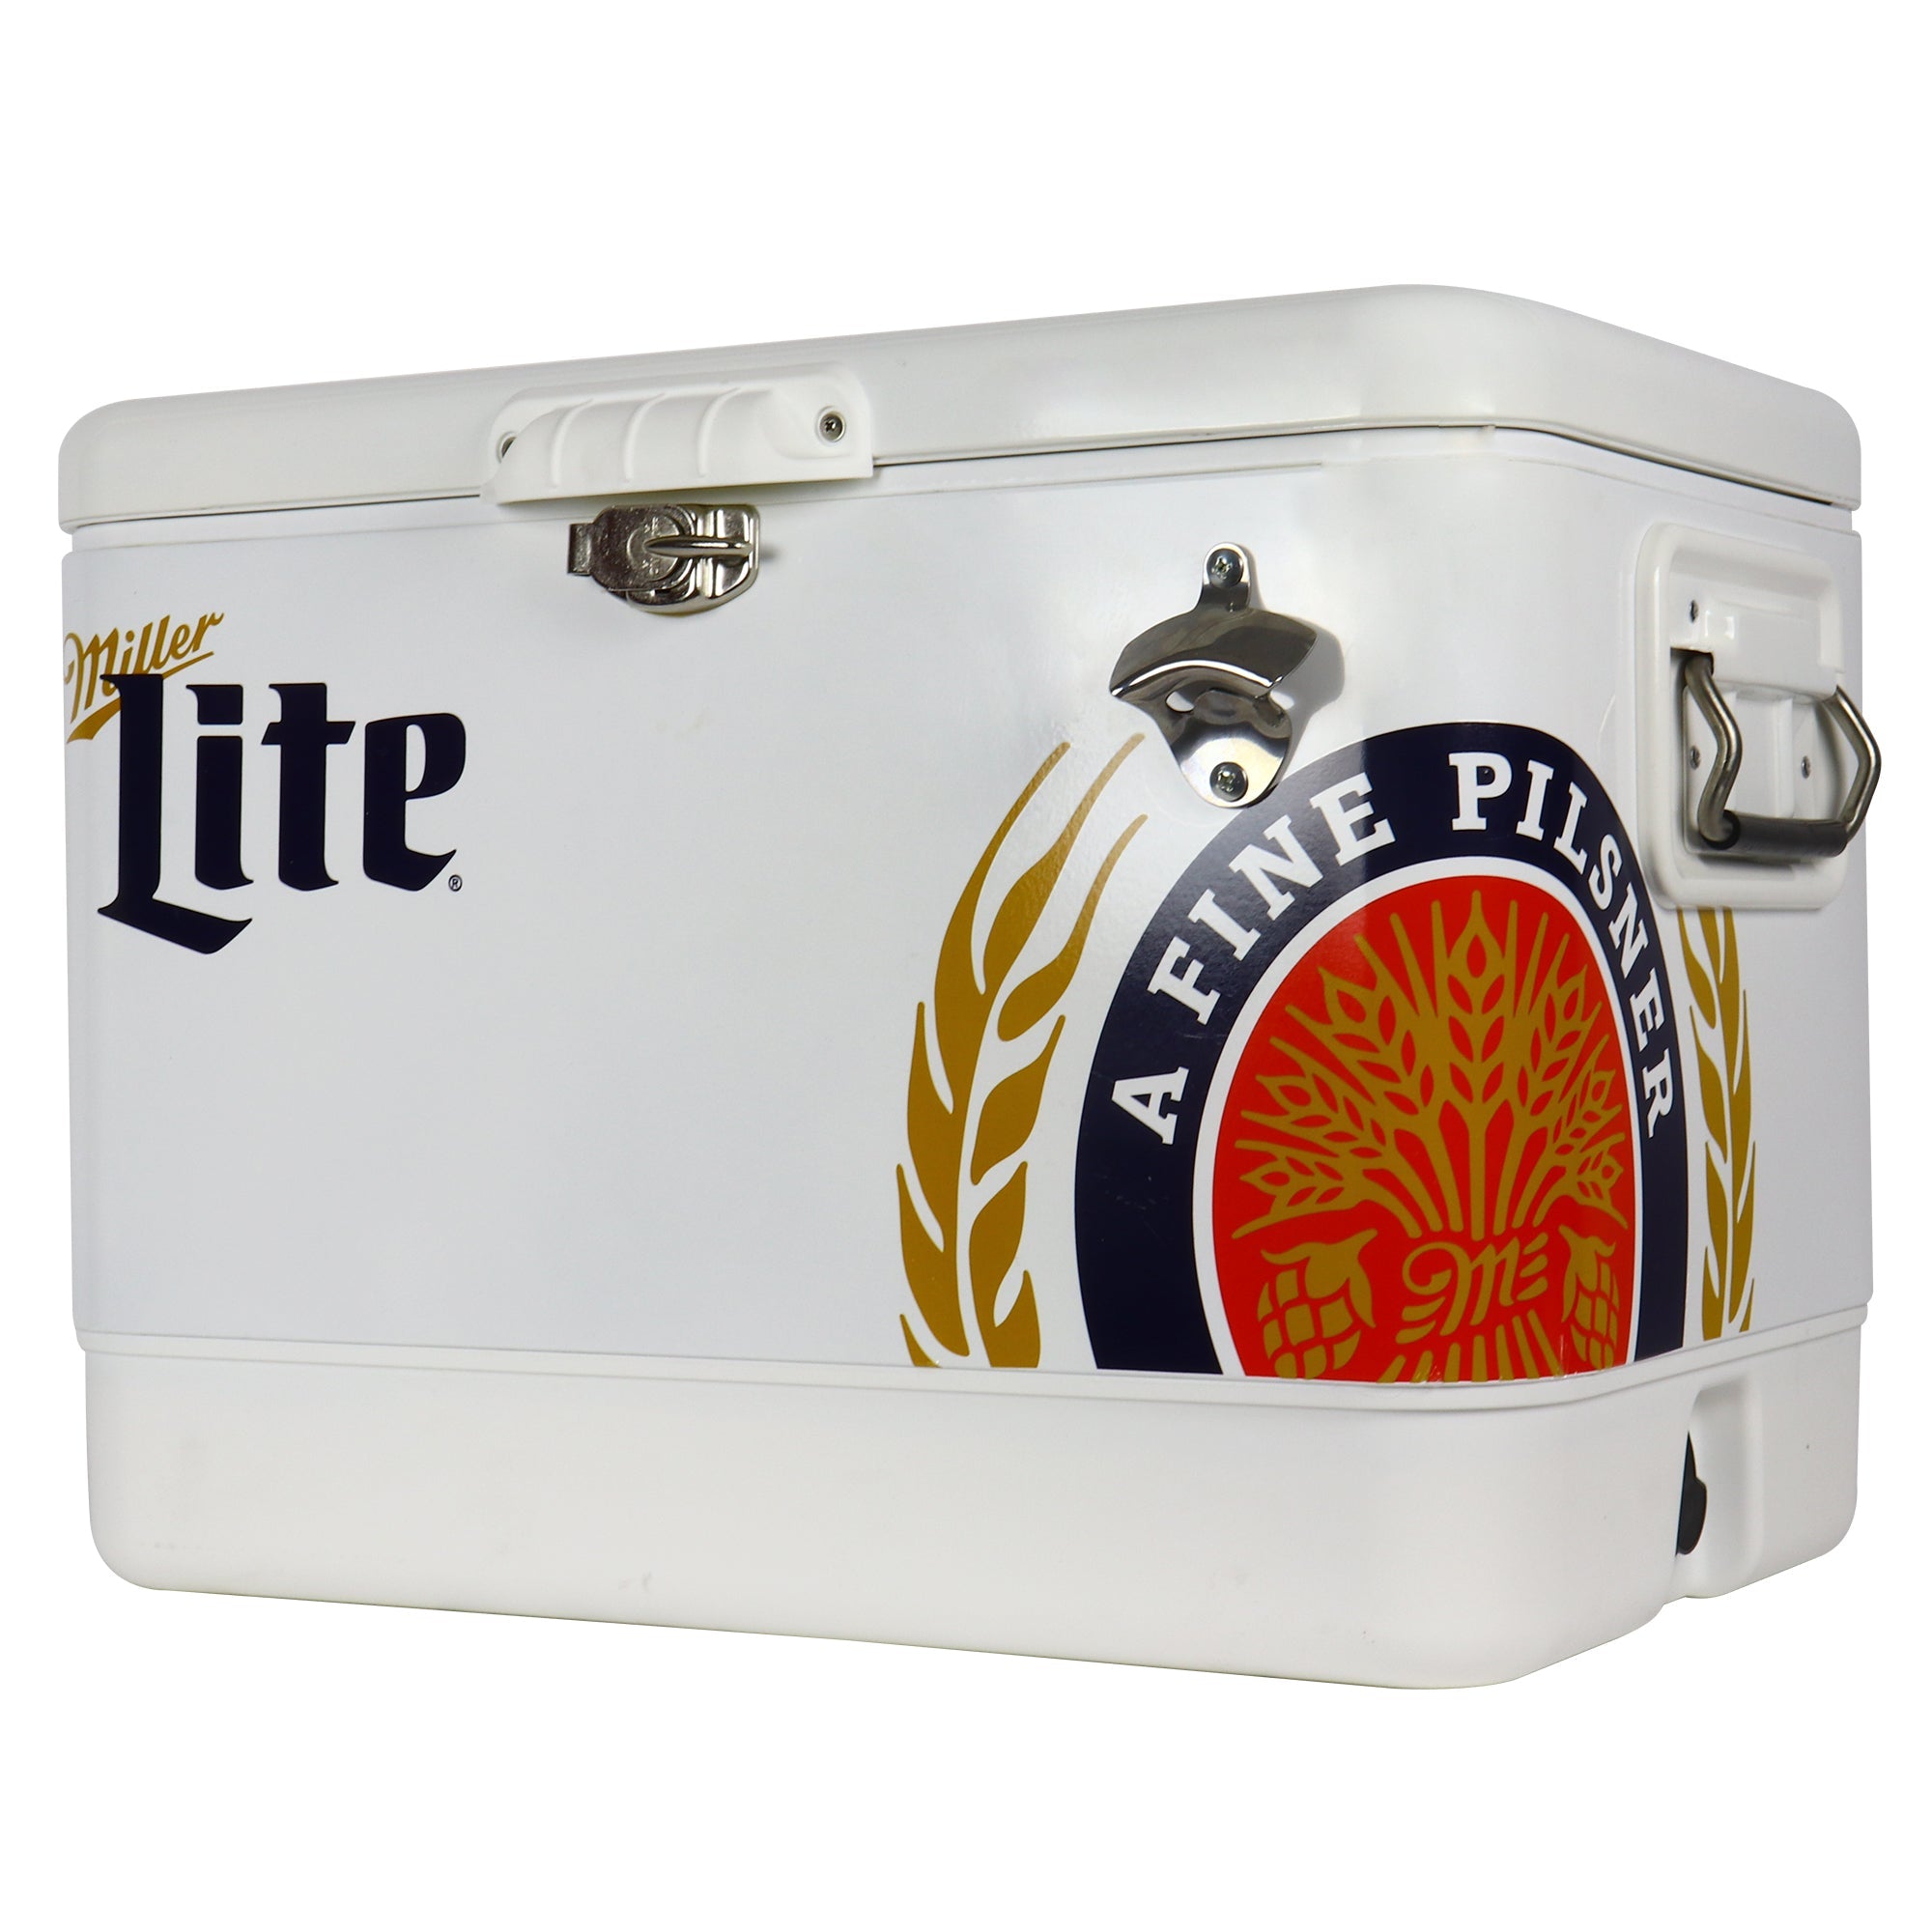 Product shot of Miller Lite 51 liter ice chest with bottle opener, closed, on a white background